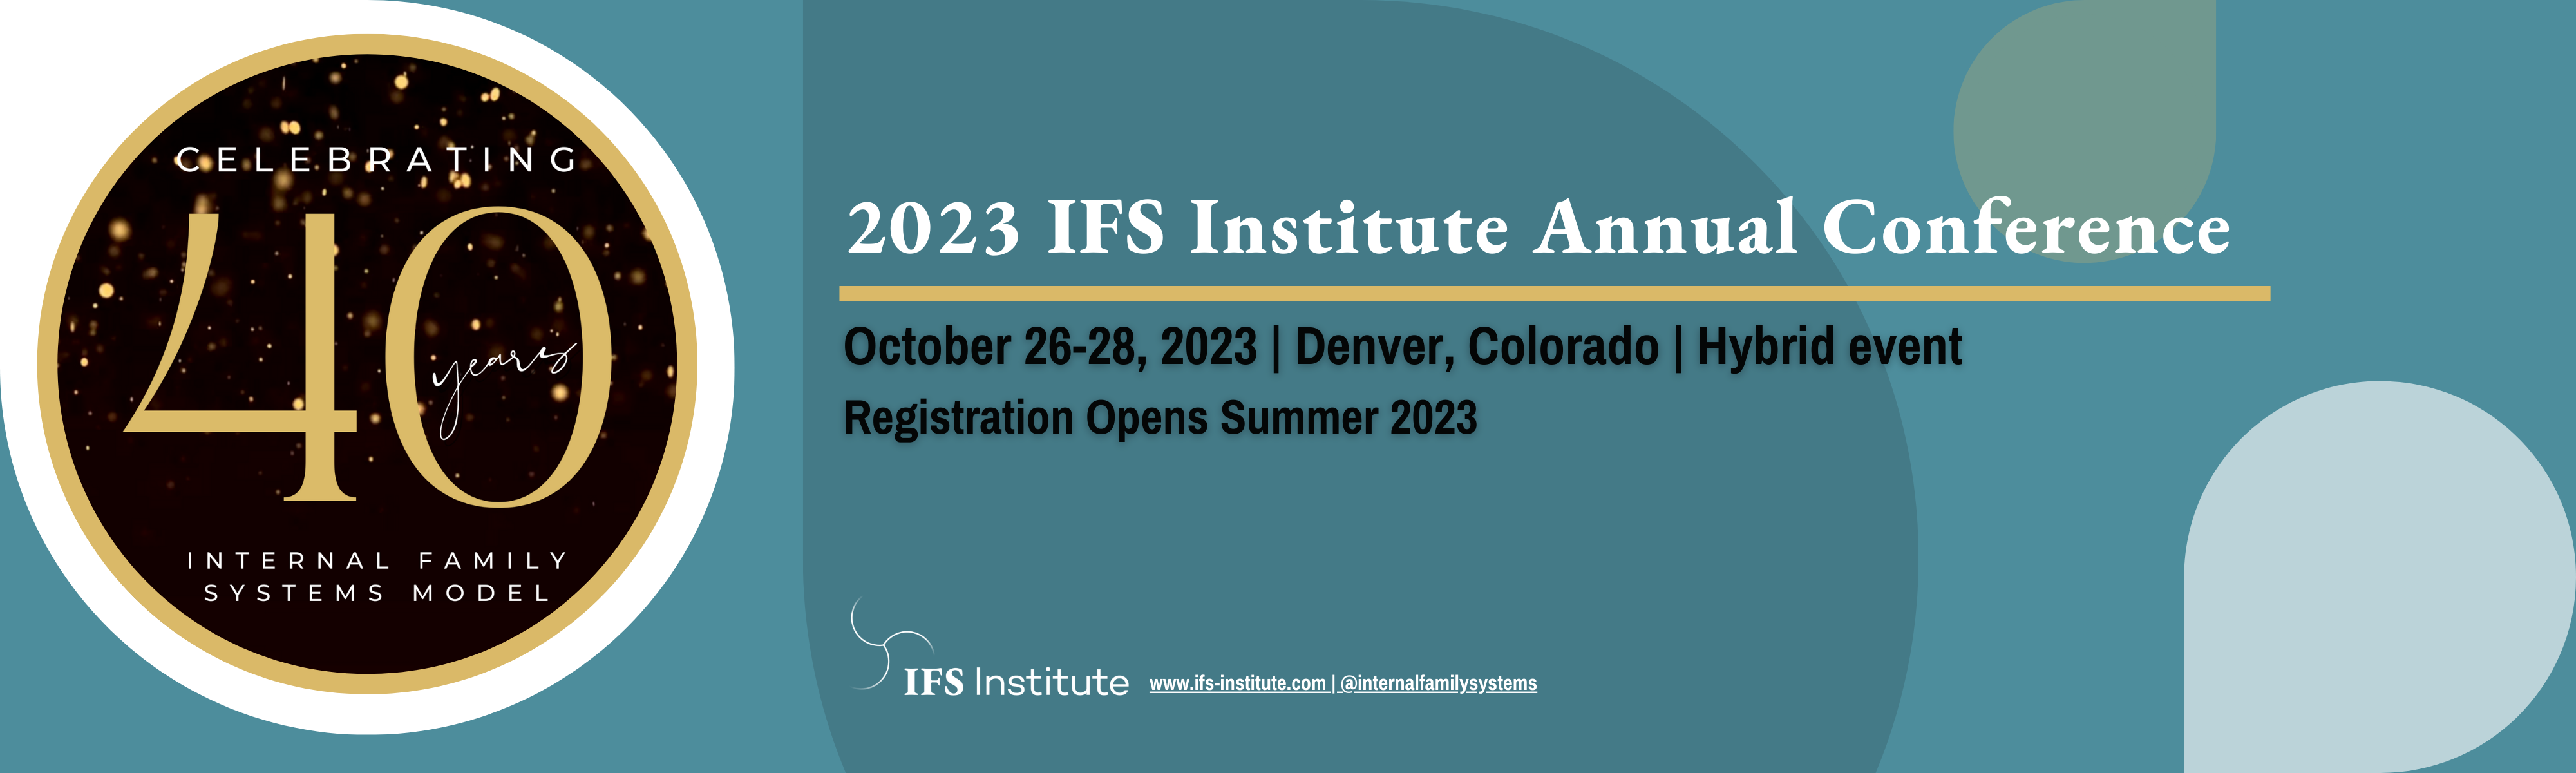 Banner blue with celebrating 40 years of IFS Model - 2023 IFSI Annual Conf. Oct. 26-27